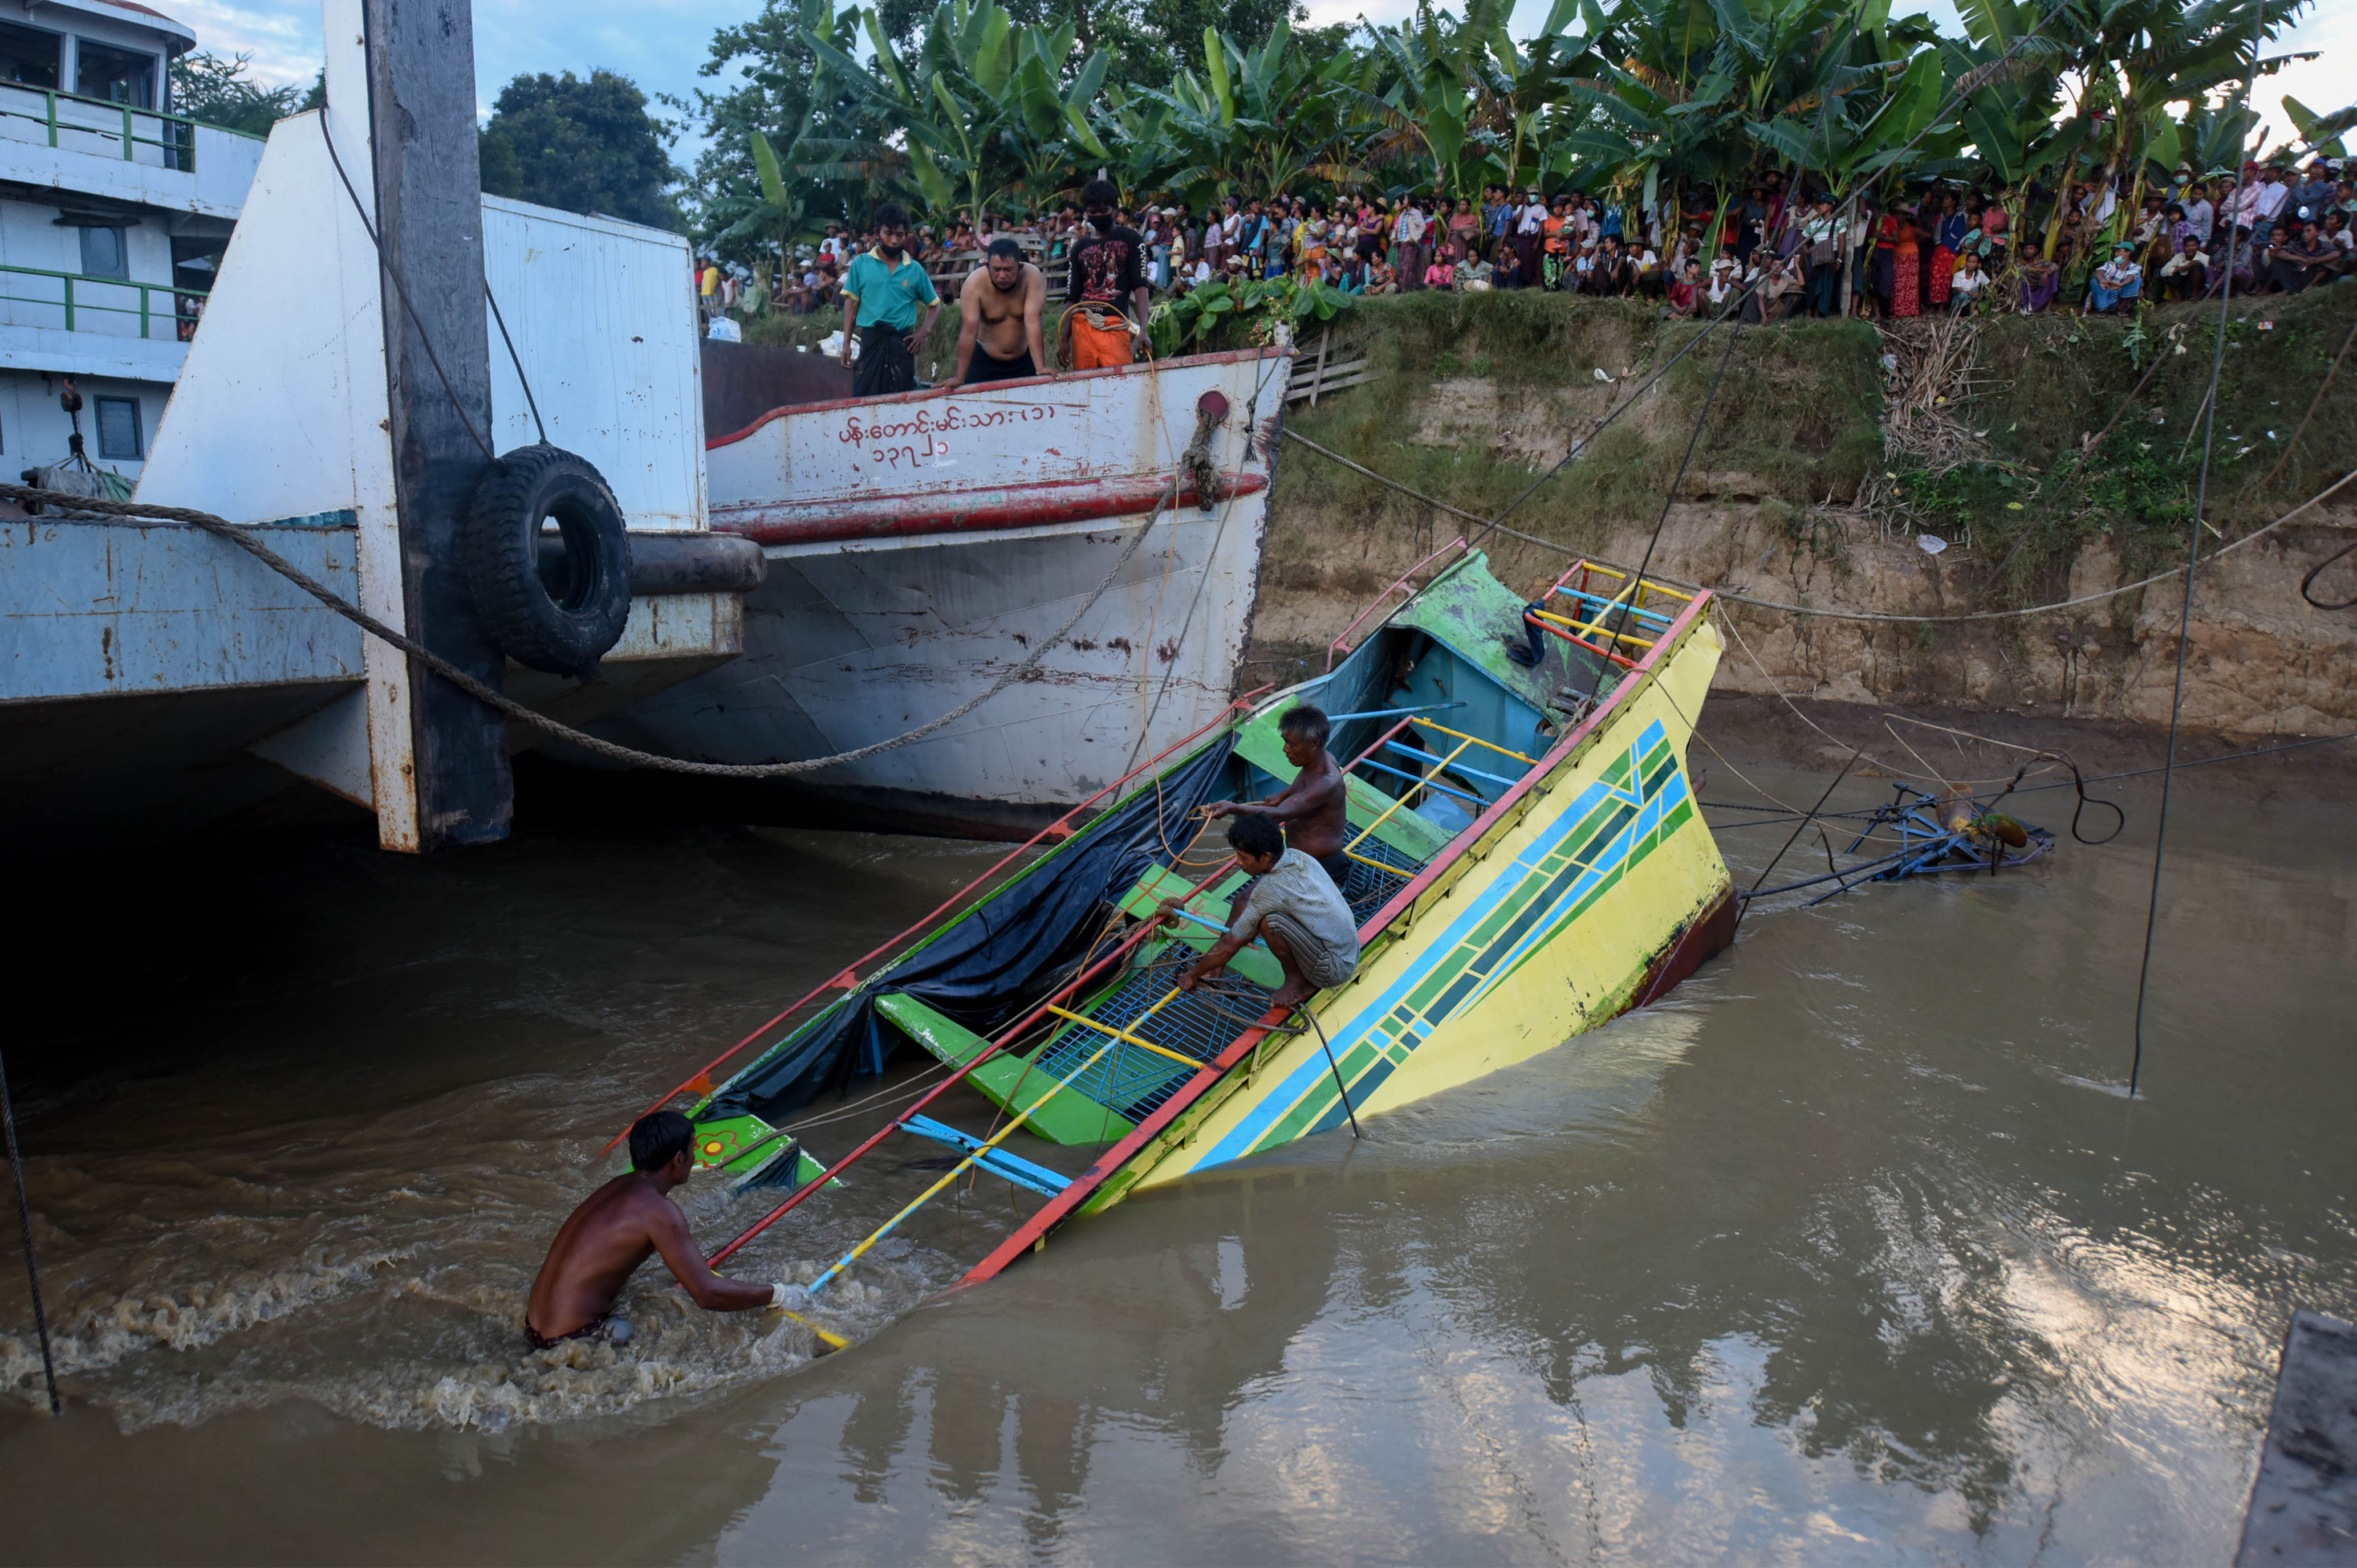 In this photograph taken on October 18, 2016 rescue workers are seen on the sunken ferry partially lifted from the water near the river bank.   The death toll from a ferry disaster on a river in central Myanmar four days ago has risen to nearly 50, officials said on October 19, 2016, with most of the deceased identified as women and at least two dozen others still missing. The overloaded vessel, whose passengers included scores of teachers and university students, went down early October 15, 2016  while it was travelling on the Chindwin River in Sagaing region. / AFP PHOTO / STR